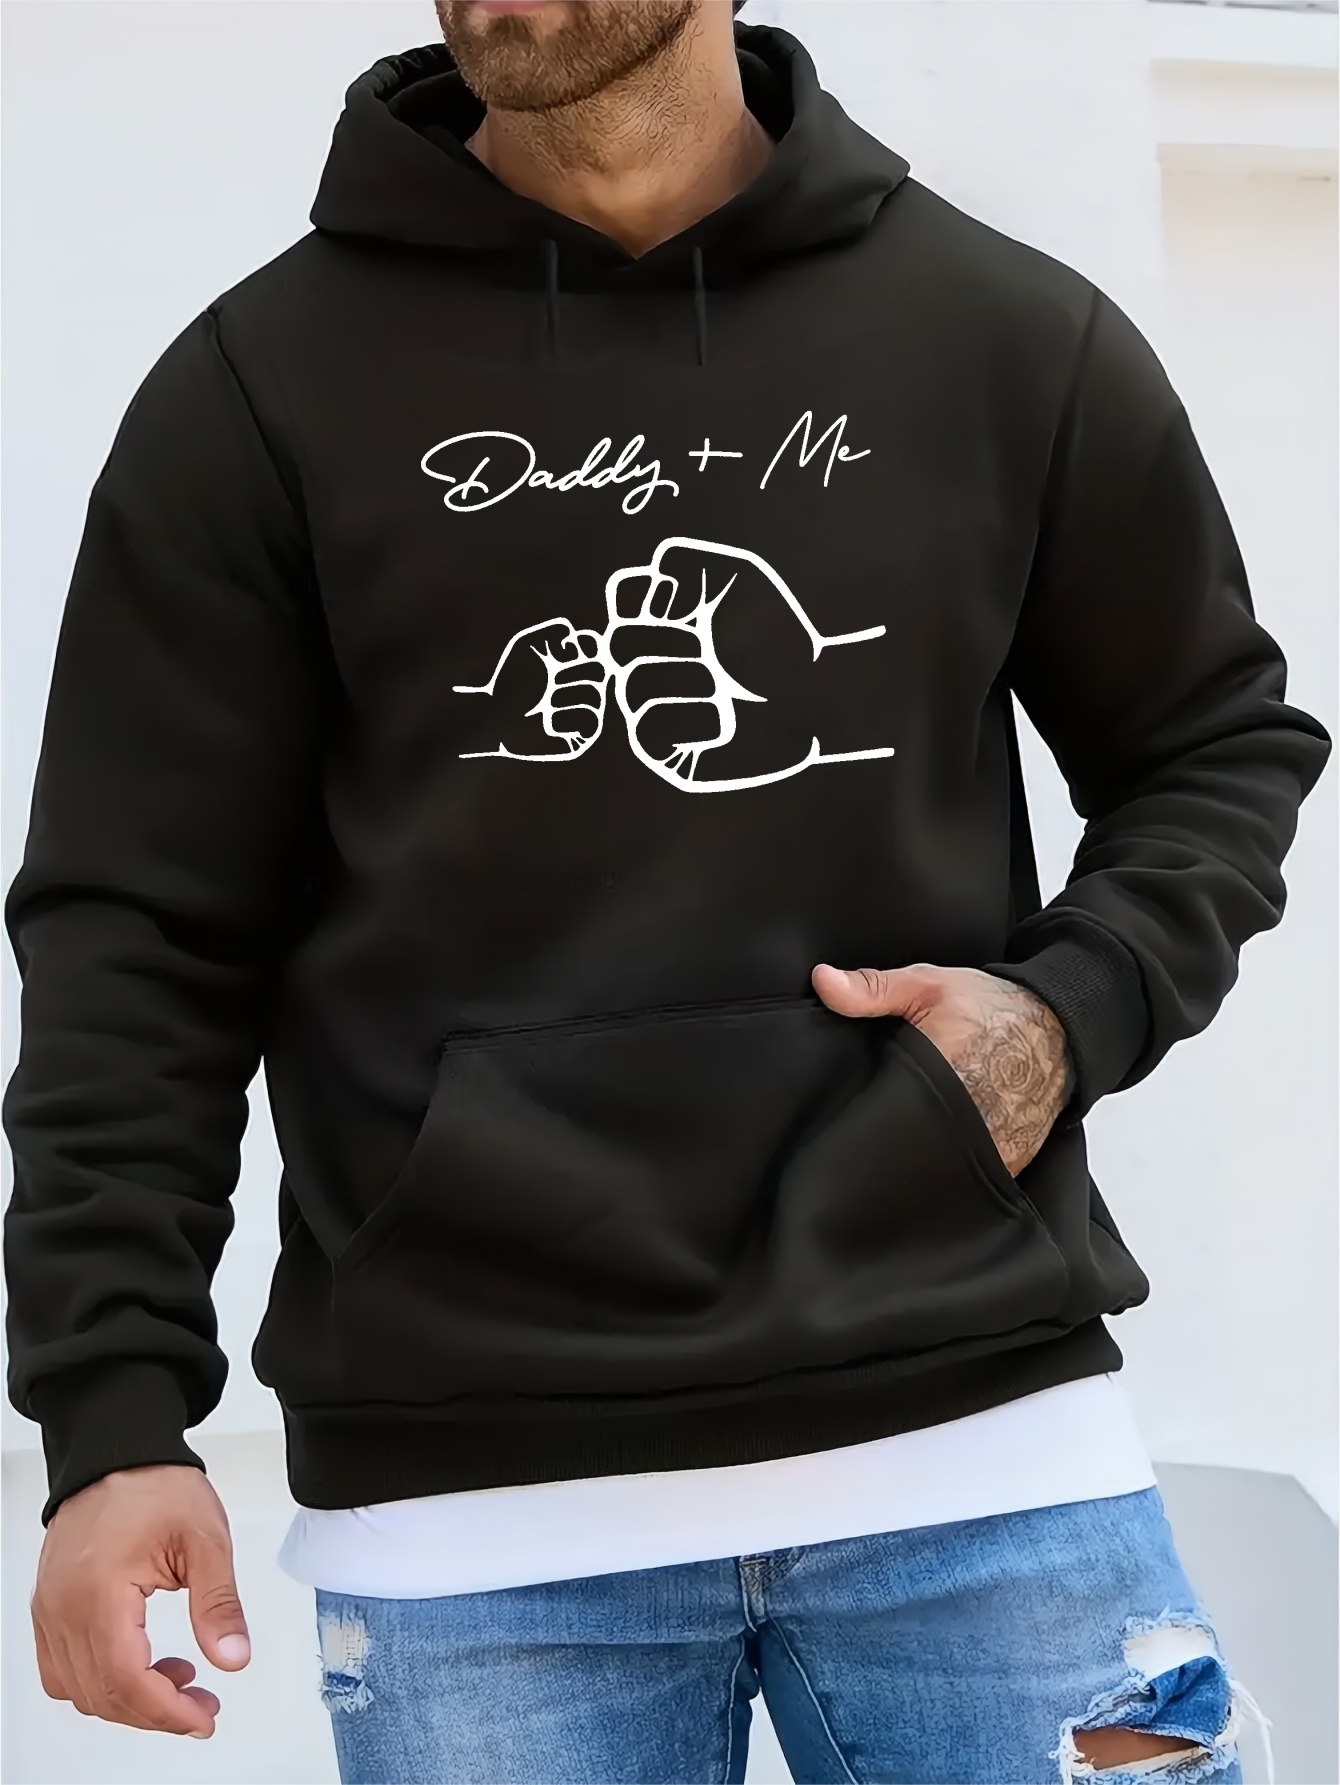 daddy me print kangaroo pocket fleece sweatshirt hoodie pullover fashion street style long sleeve sports tops graphic pullover shirts for men autumn winter gifts details 31